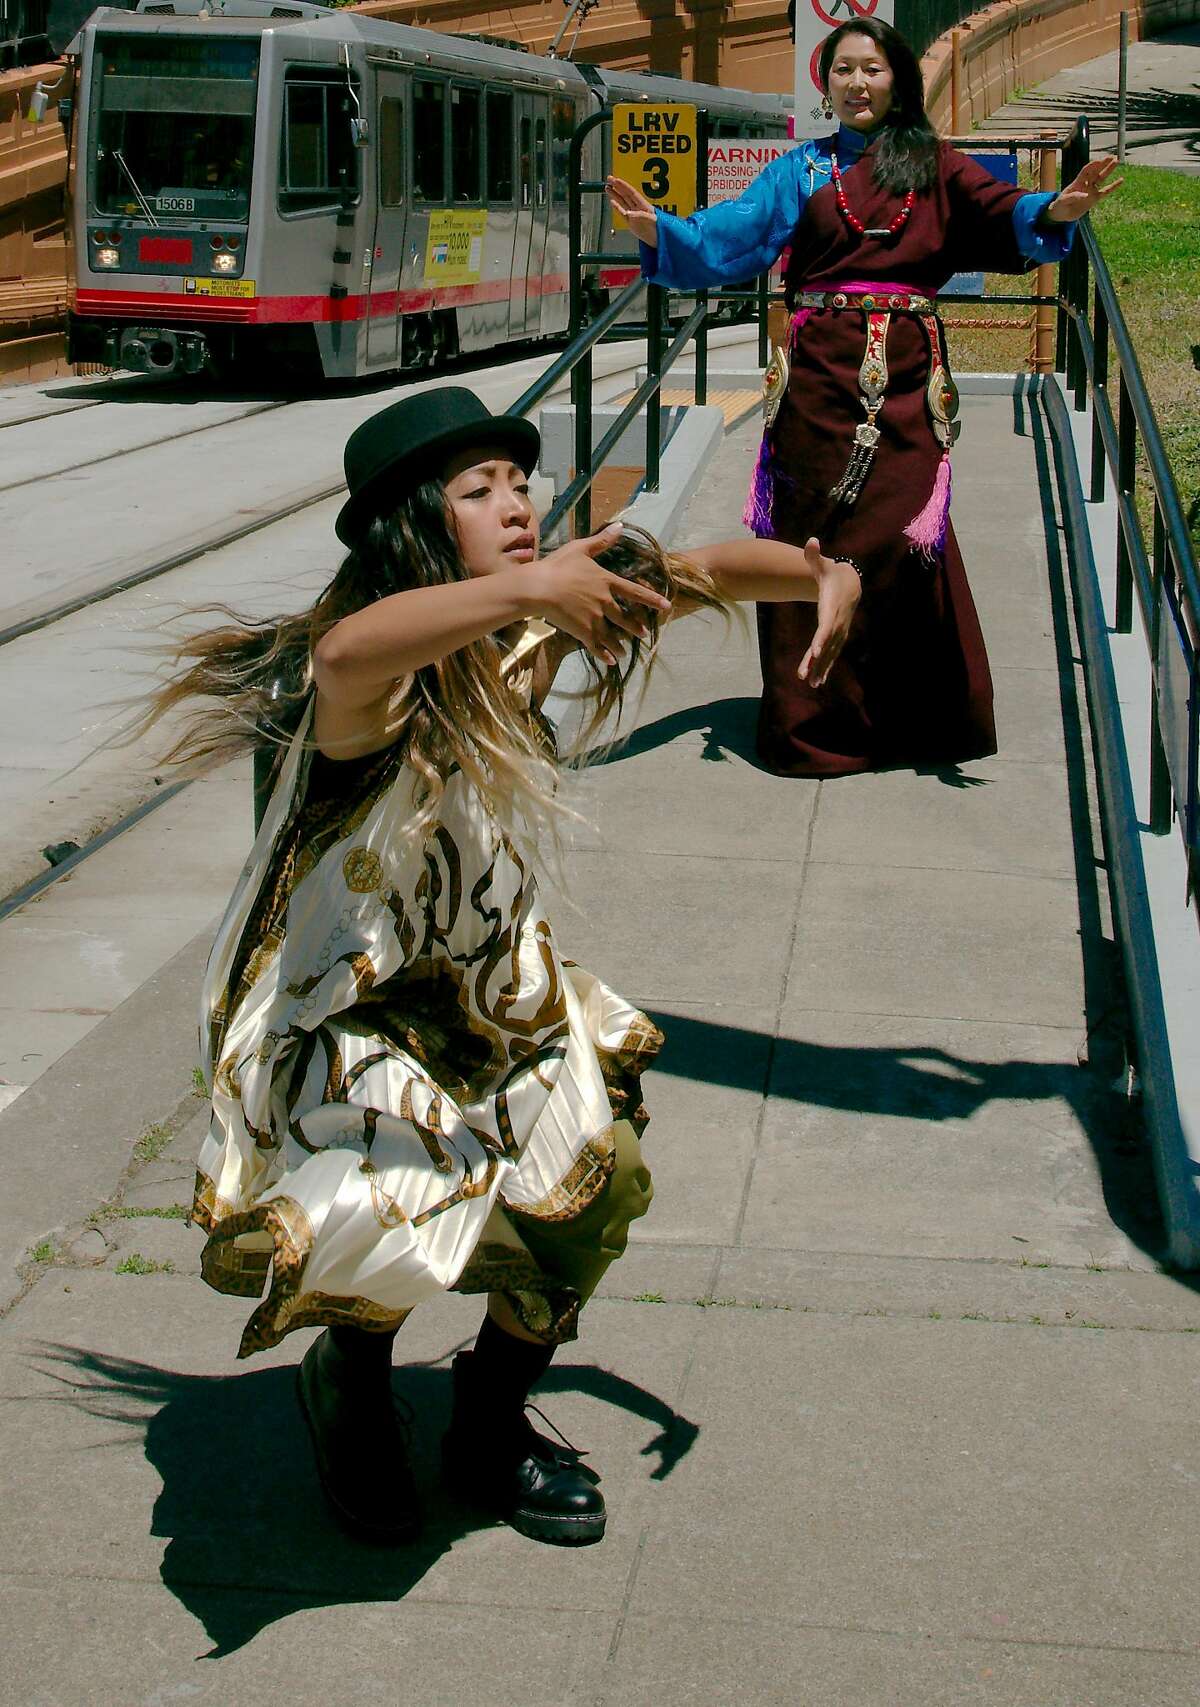 Sammay Dizon of Embodiment Project, left, and Tsering Wangmo of Chaksam-Pa perform in San Francisco Trolley Dances. Photo: Andy Mogg